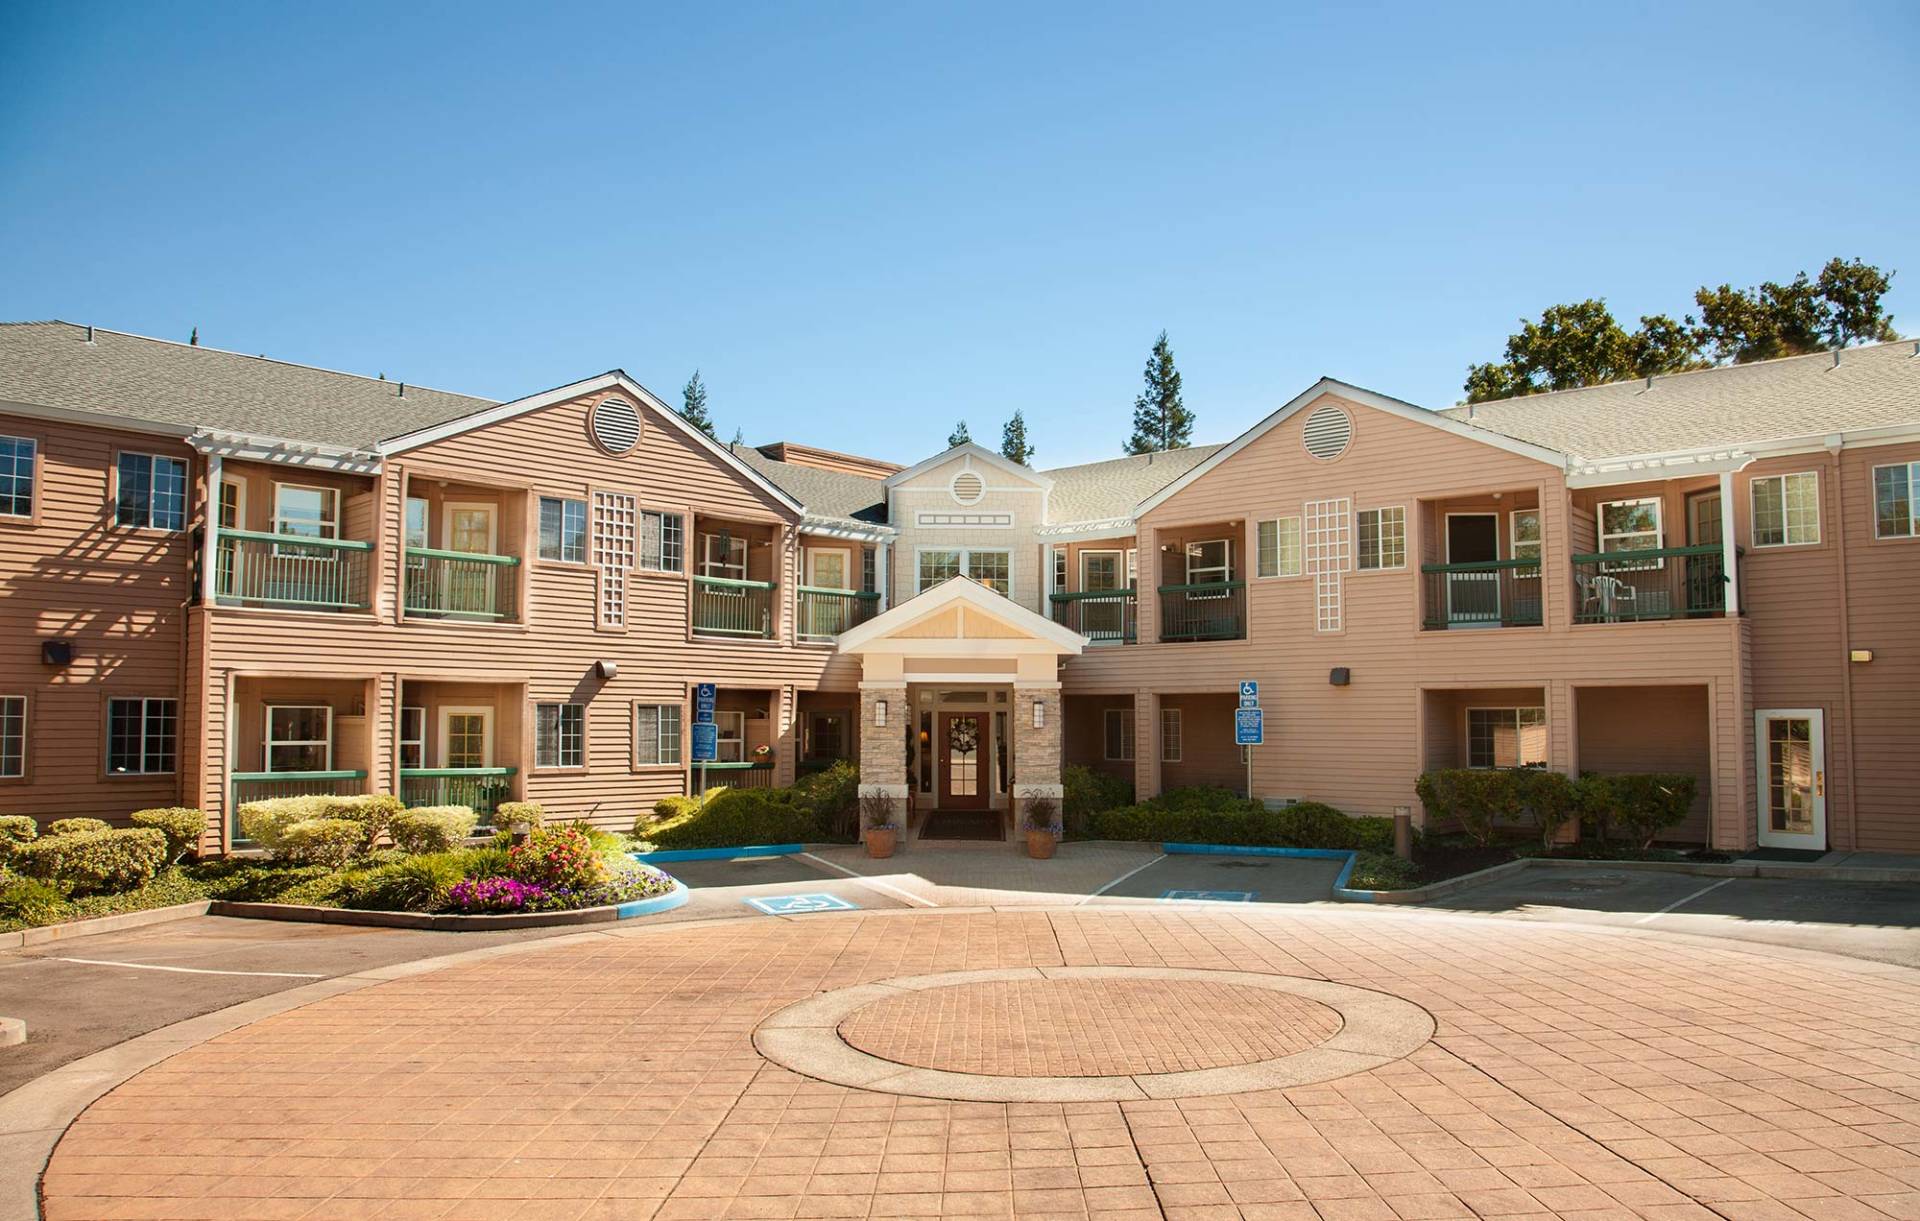 Tiffany Court Assisted Living Building